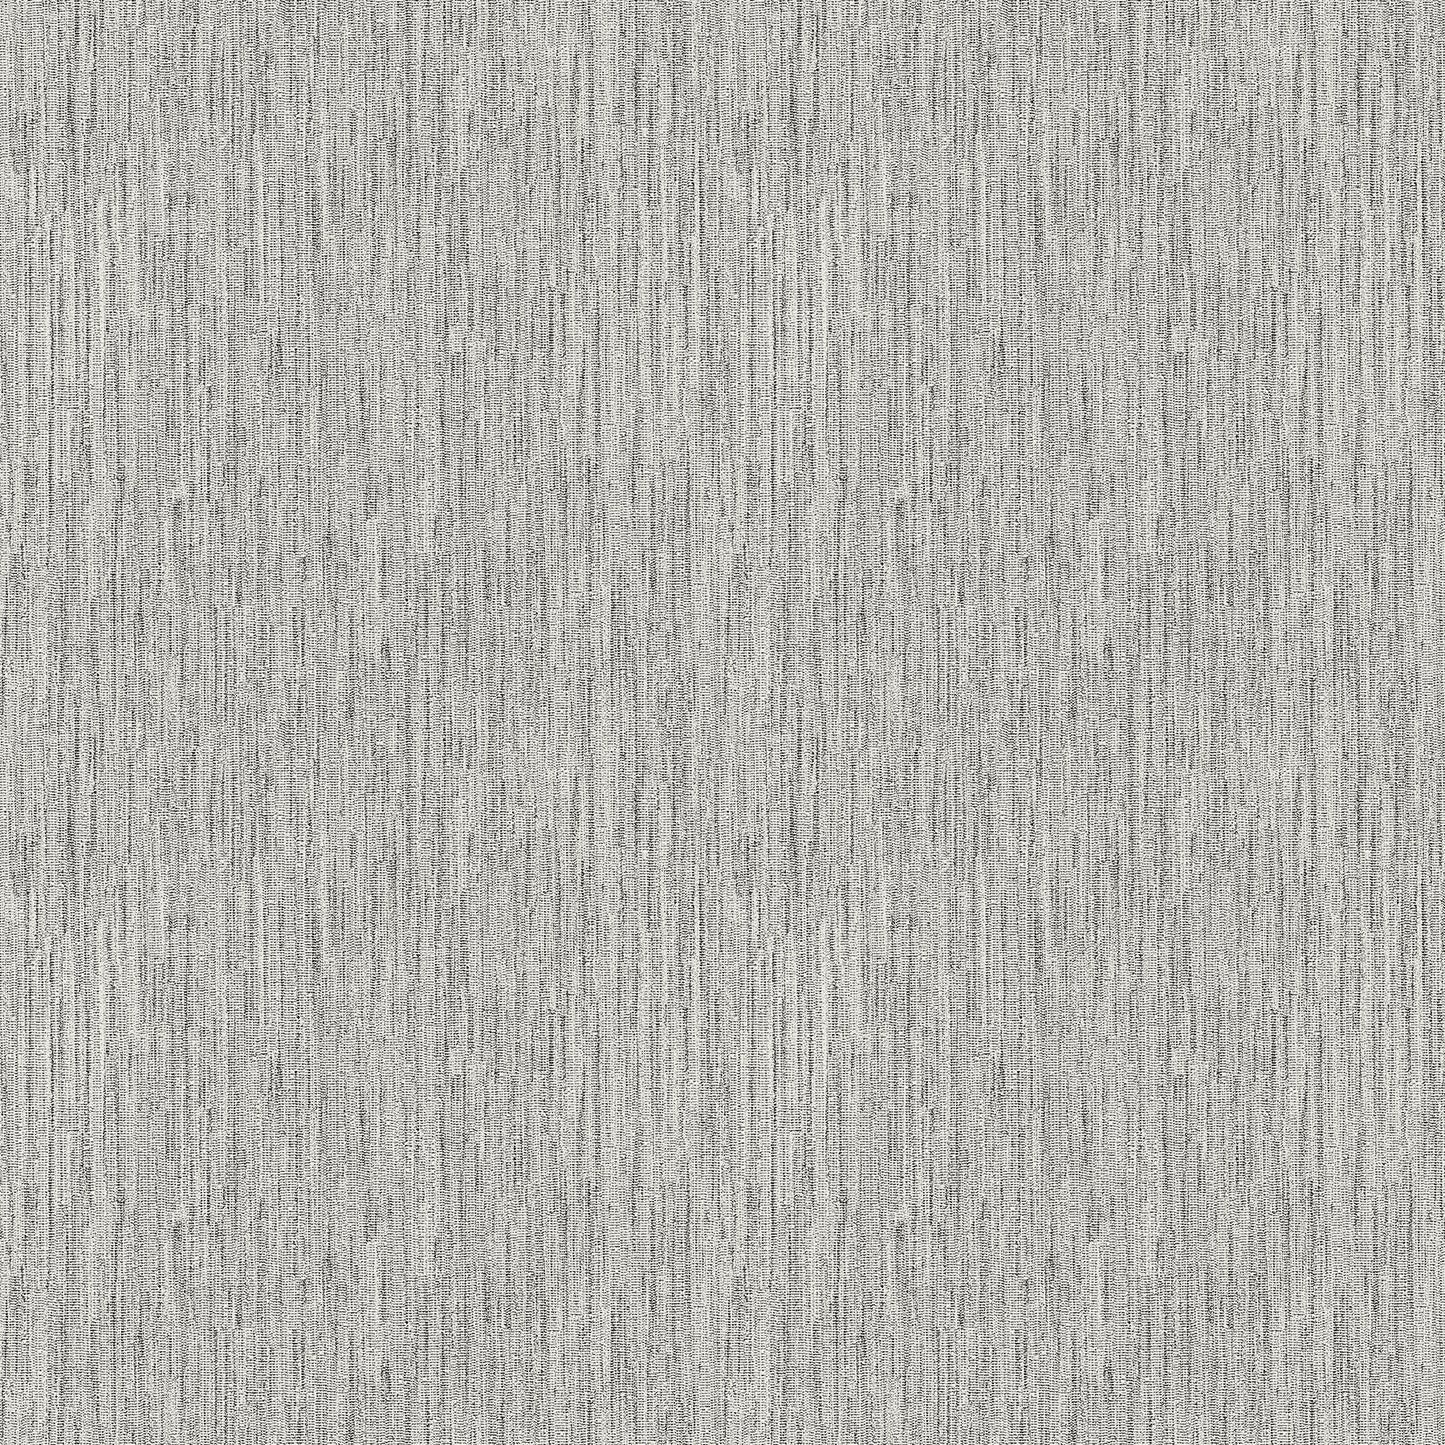 Save on 2971-86338 Dimensions Terence Grey Pinstripe Texture Grey A-Street Prints Wallpaper